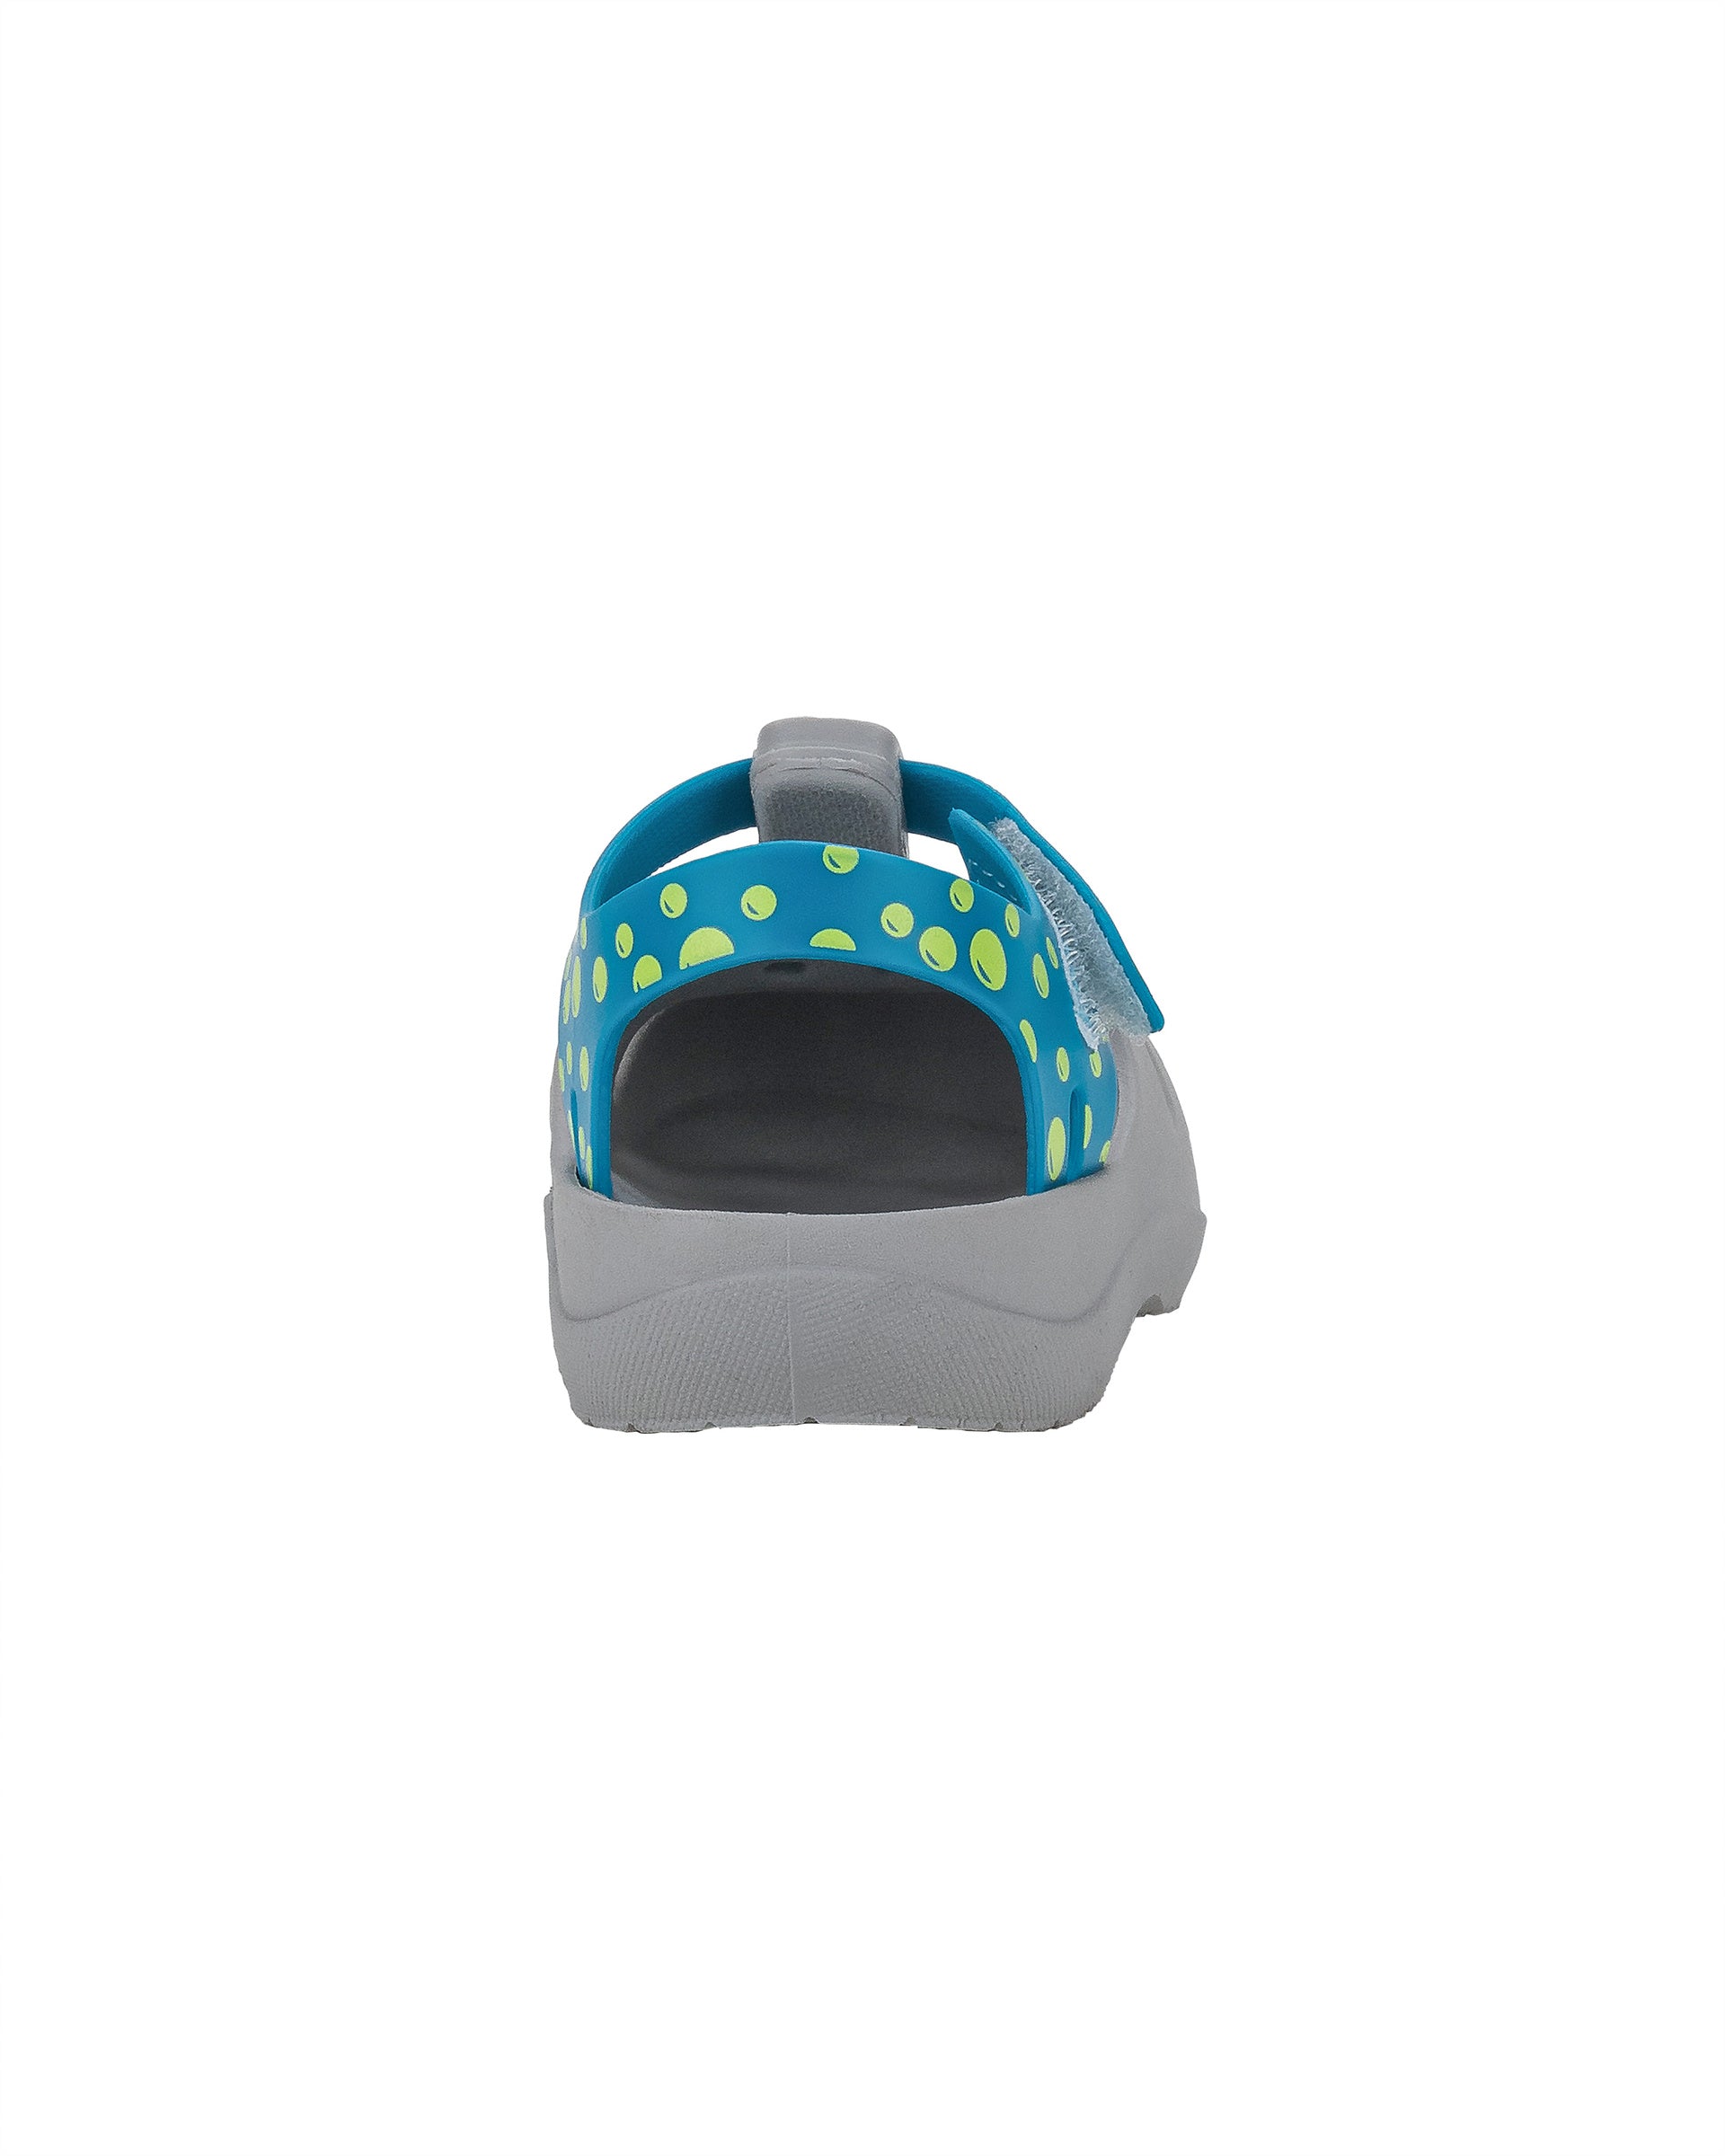 Back view of a grey and blue Ipanema Summer baby fisherman sandal with blue crab on upper and green bubbles on a blue strap.